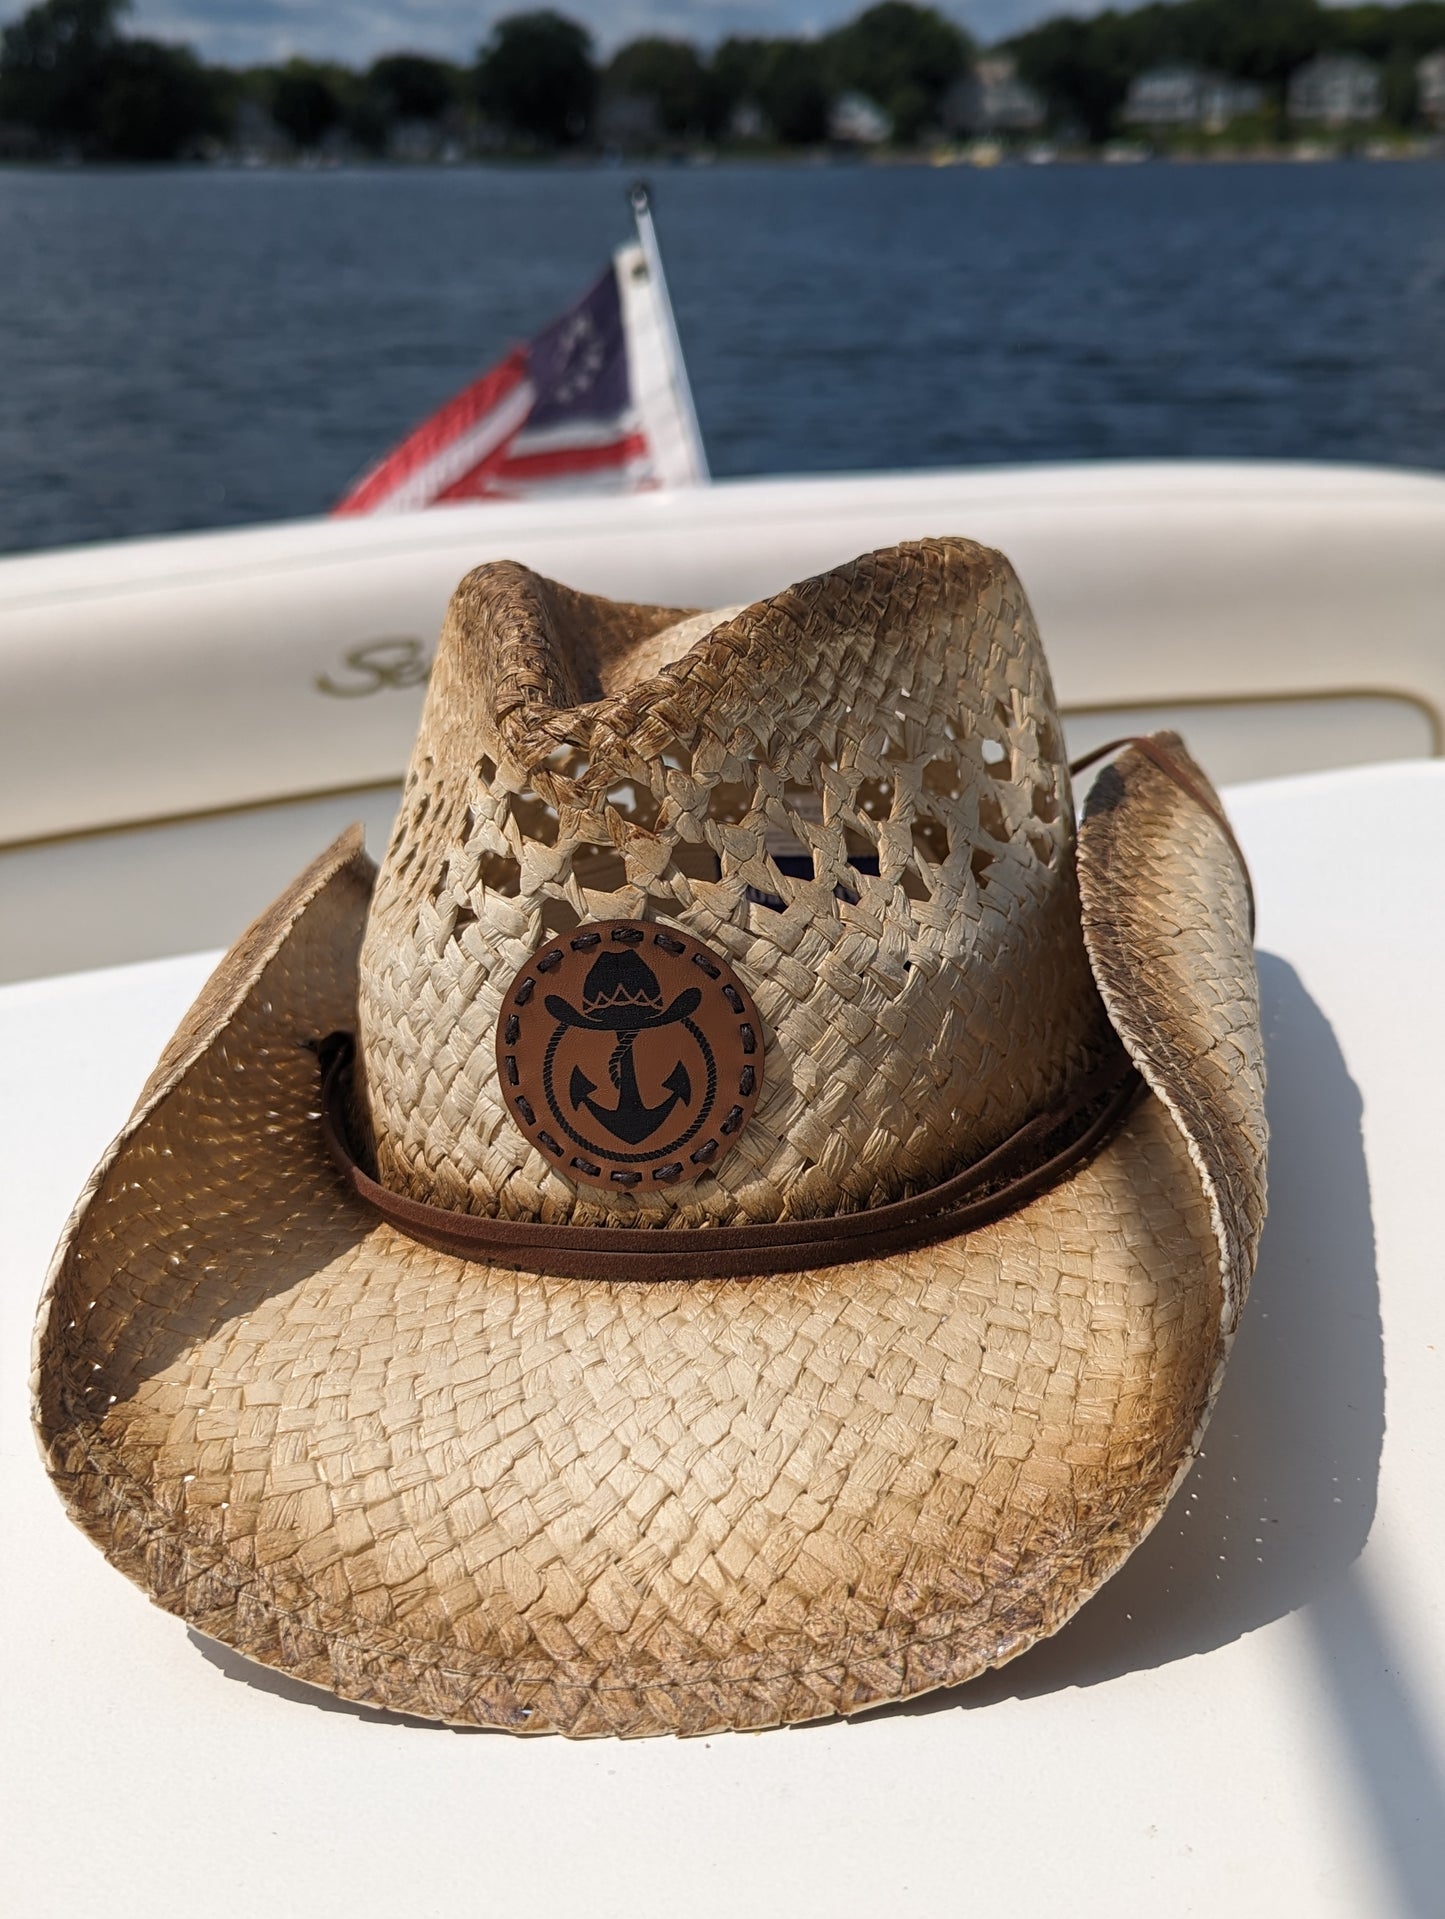 Photo of a Lake Cowboy Signature Cowboy Hat with the iconic hat, lasso and anchor logomark on the front of the hat. The hat is shown sitting on a table on a boat with the American flag in the background. The photo was taken on Lake Minnetonka, MN.